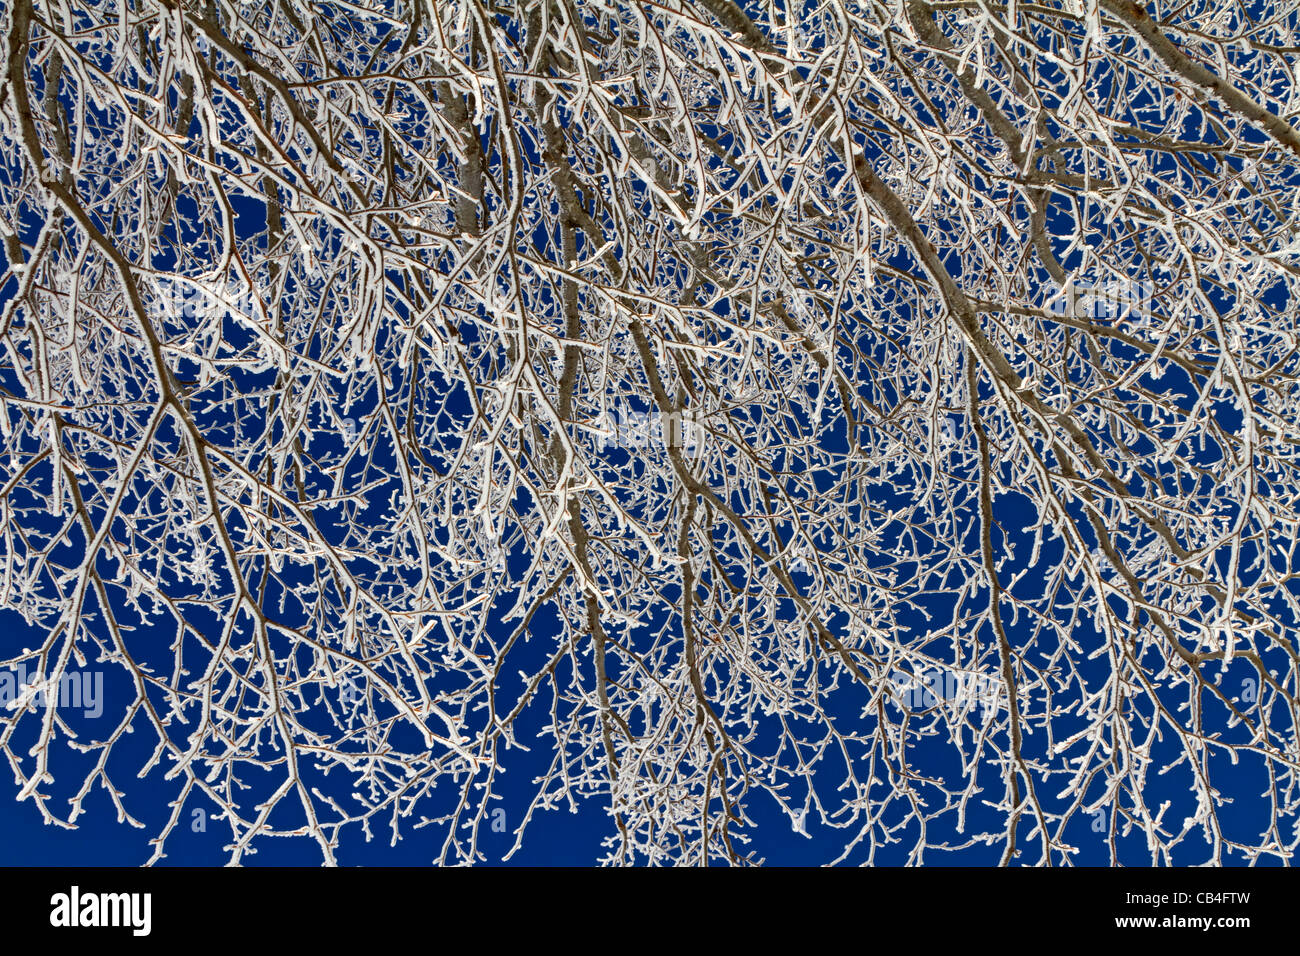 Branches with hoarfrost Stock Photo